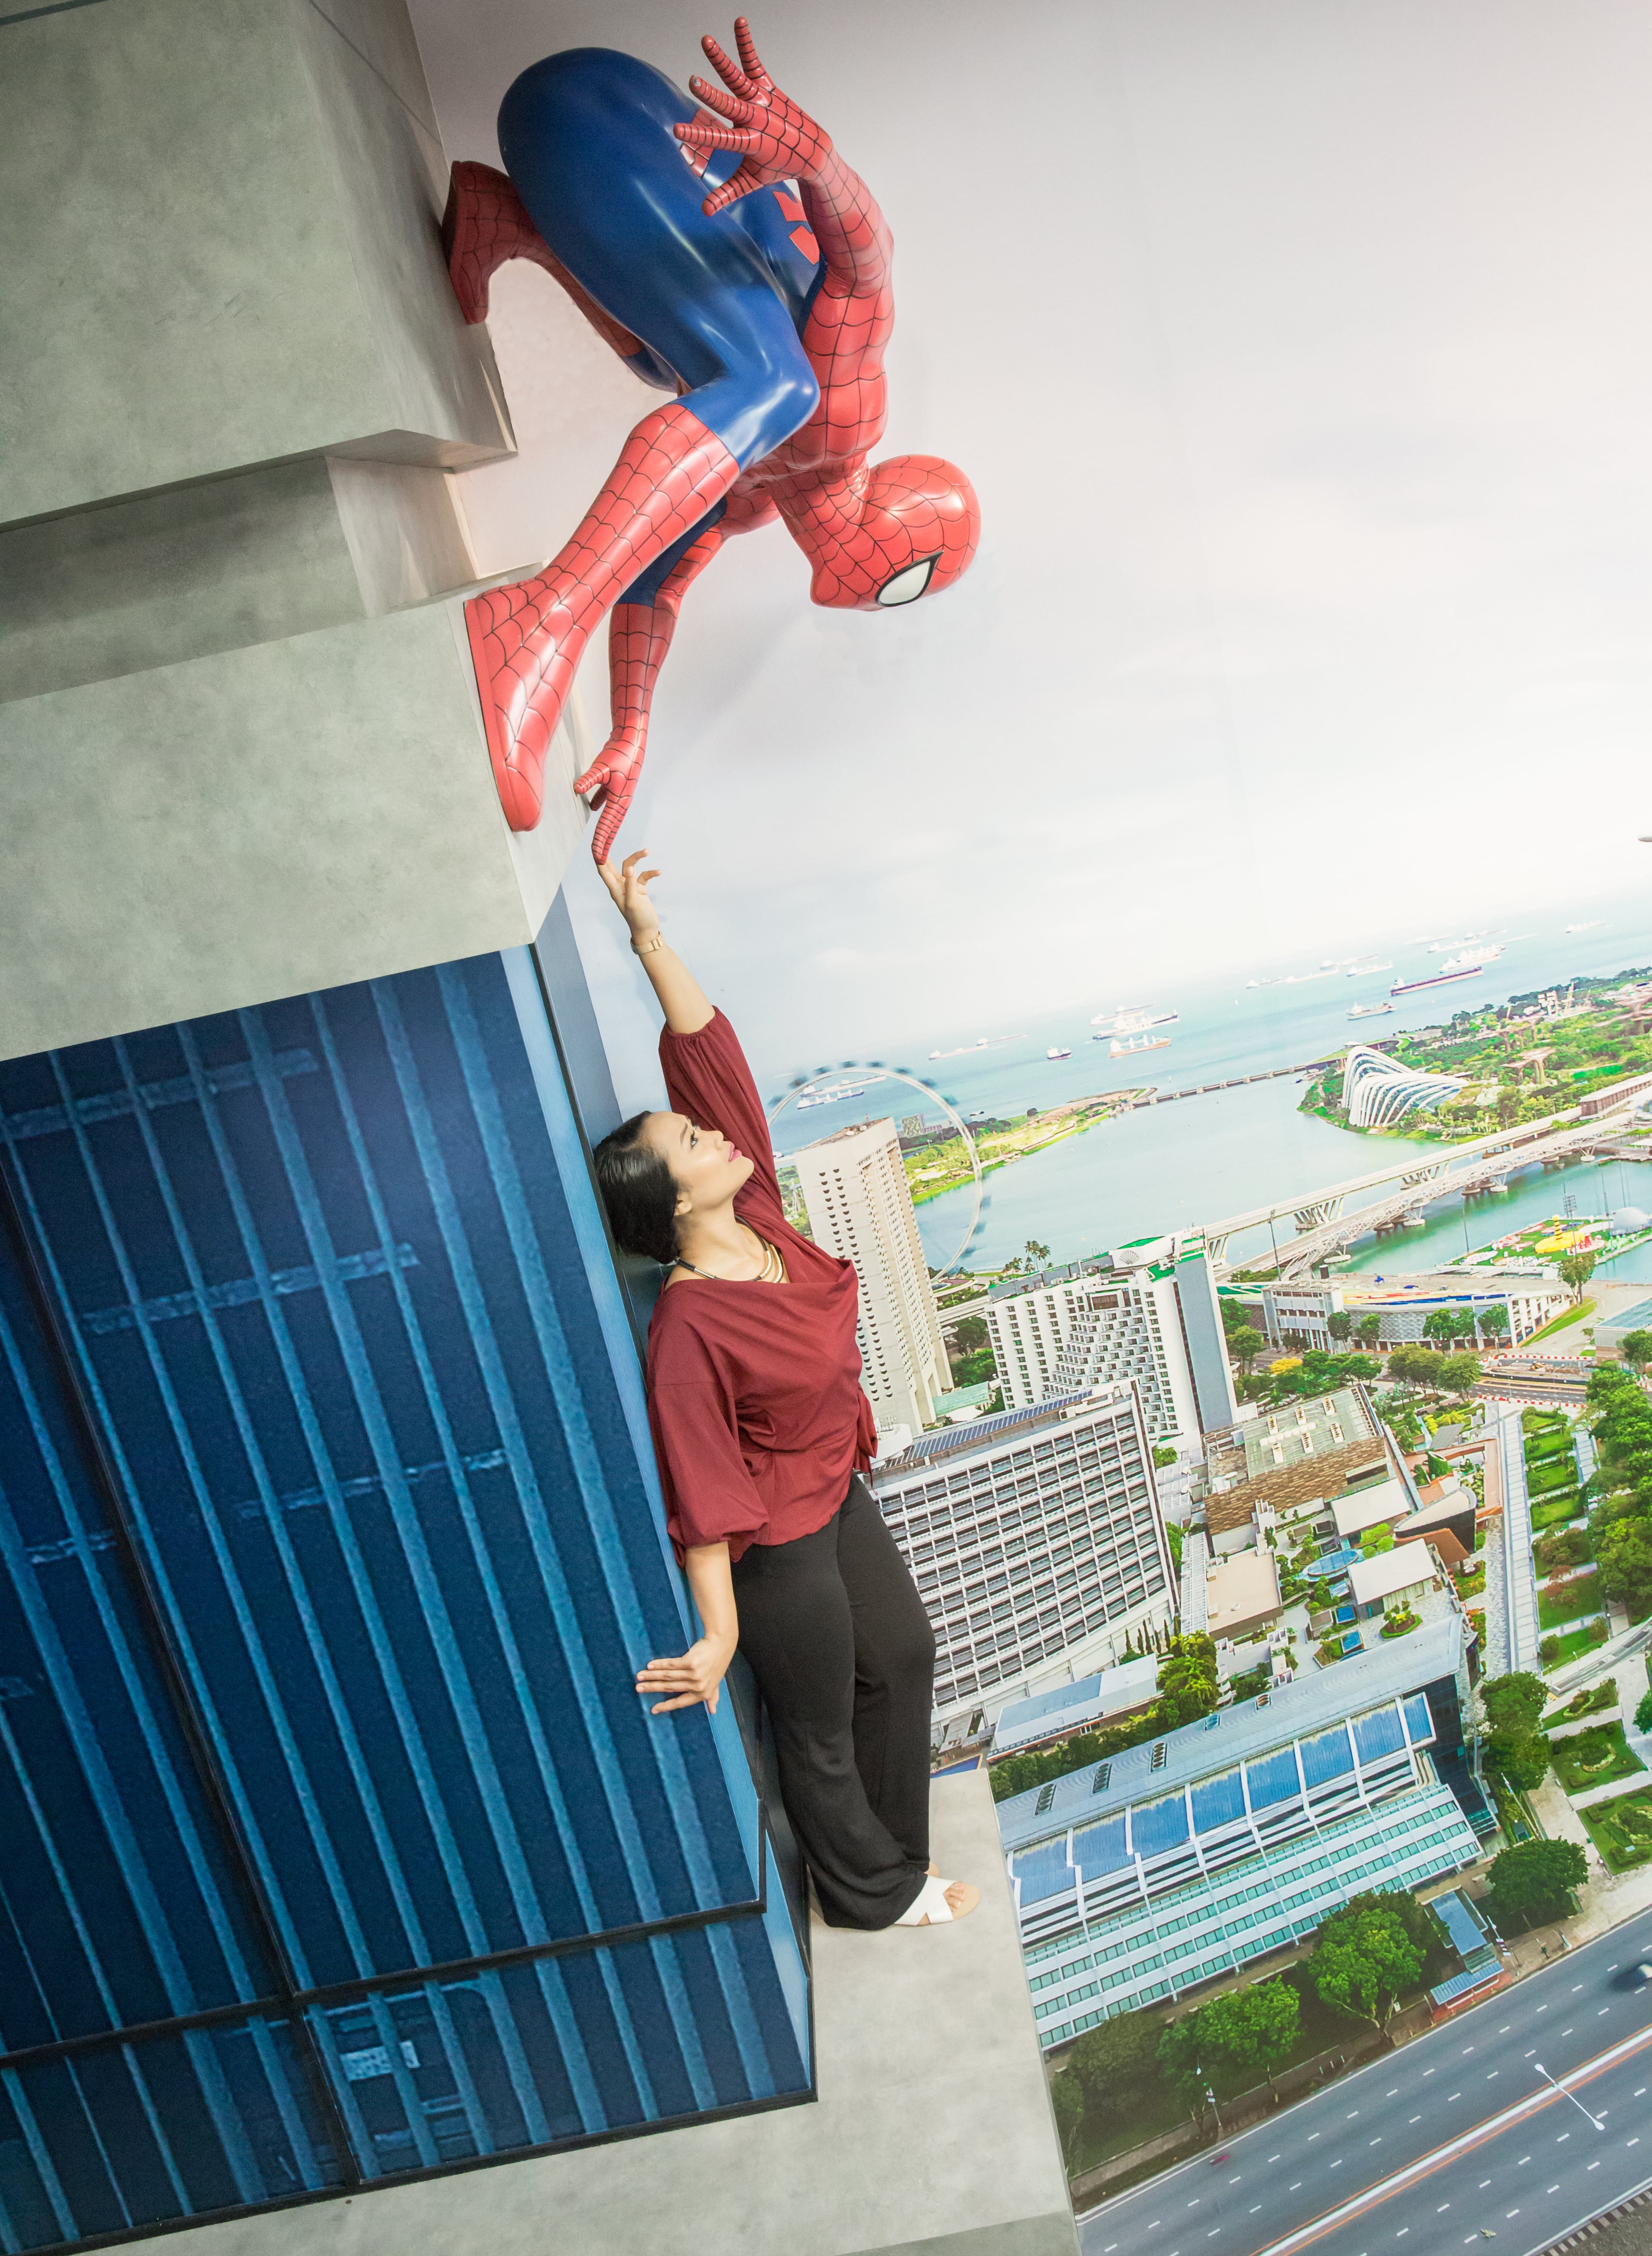 A visitor at Madame Tussauds Singapore - Marvel Universe 4D, pointing towards a Spider-Man figure that appears to be clinging to the side of a building exterior. The visitor is standing in front of a cityscape backdrop, making it seem like they are part of a thrilling superhero adventure